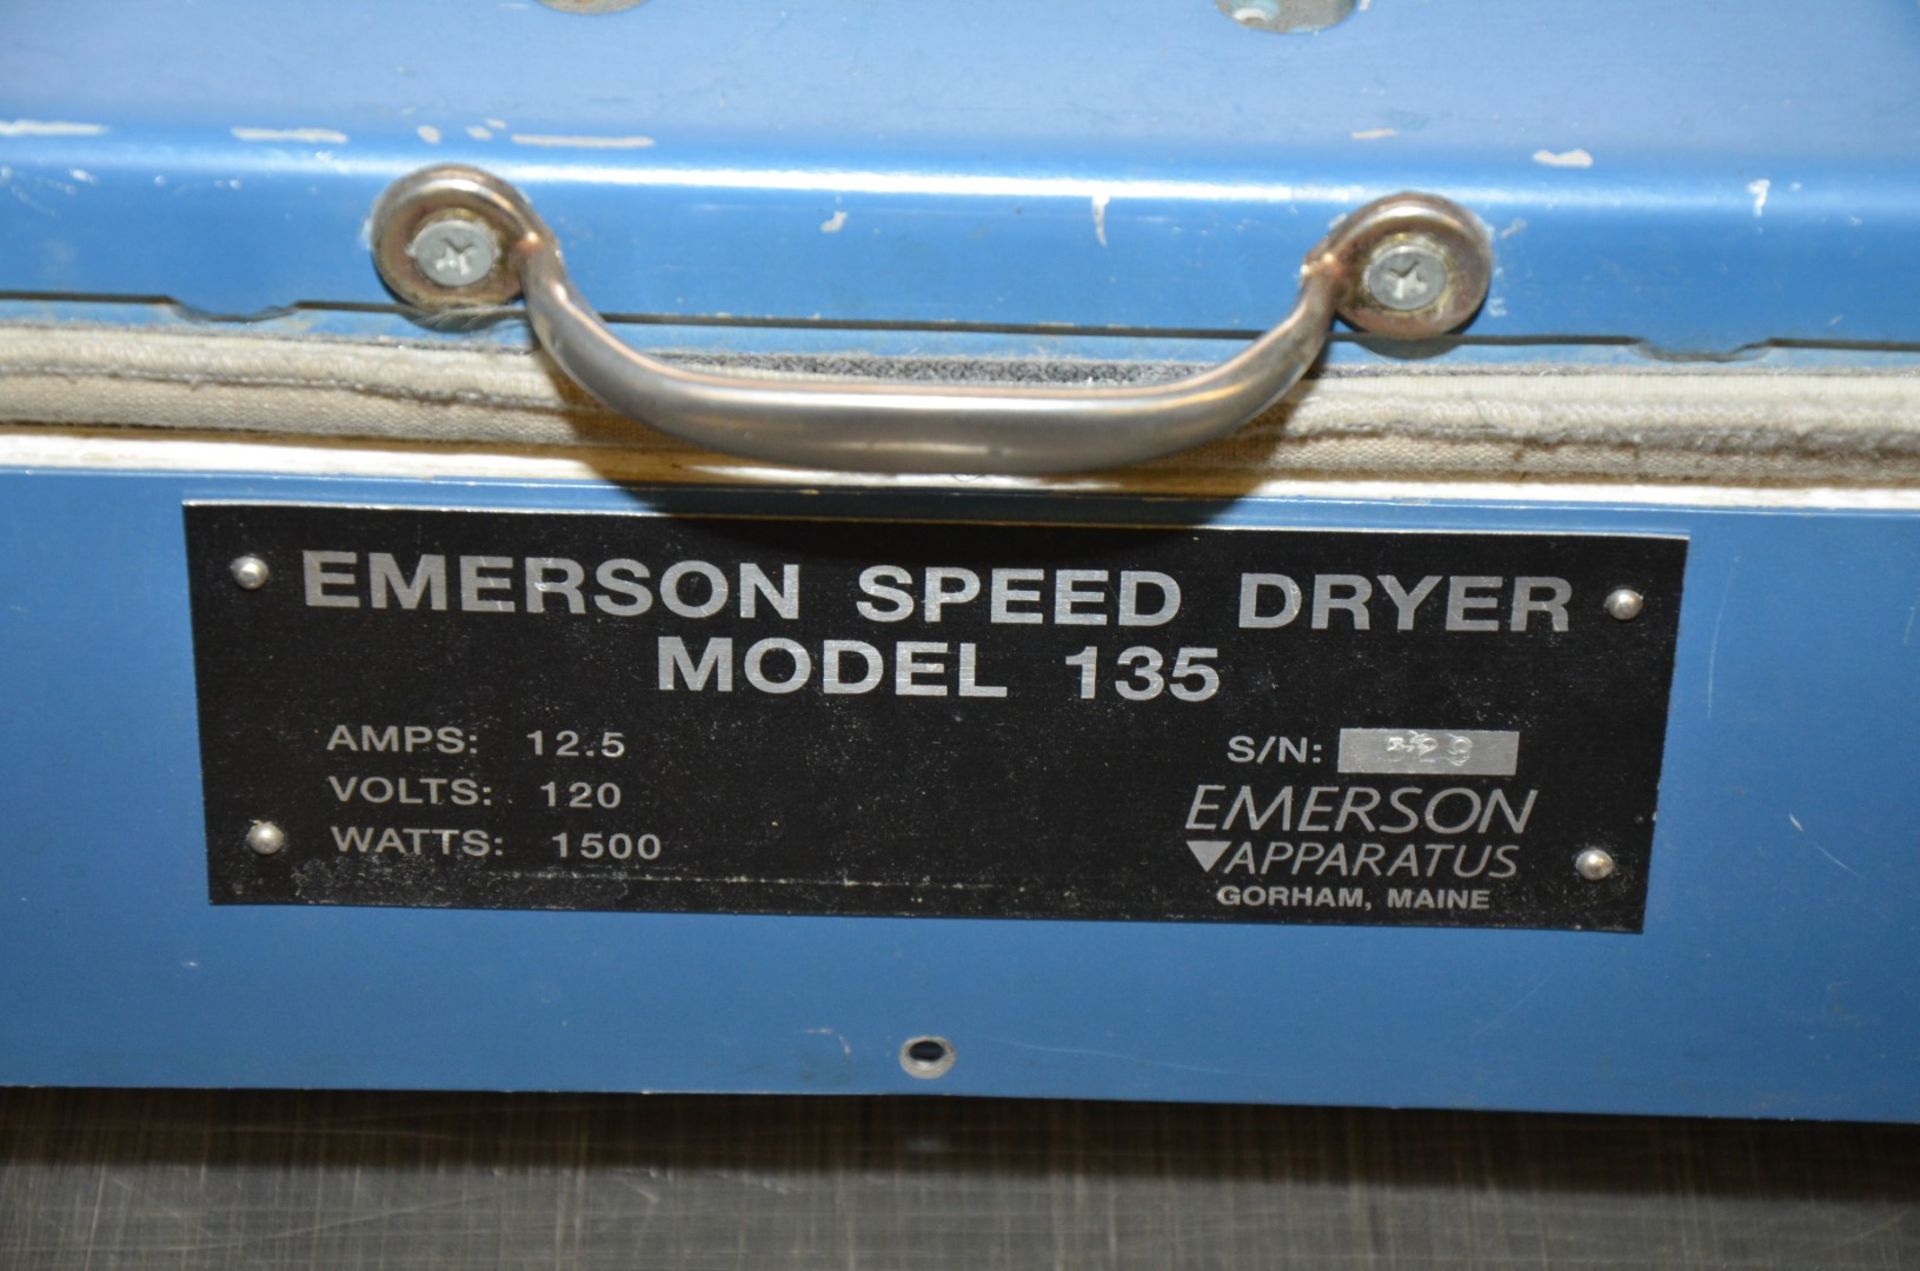 EMERSON MODEL 135 ELECTRIC SPEED DRYER WITH OMRON DIGITAL MICROPROCESSOR CONTROL, 1500-WATT - Image 3 of 7